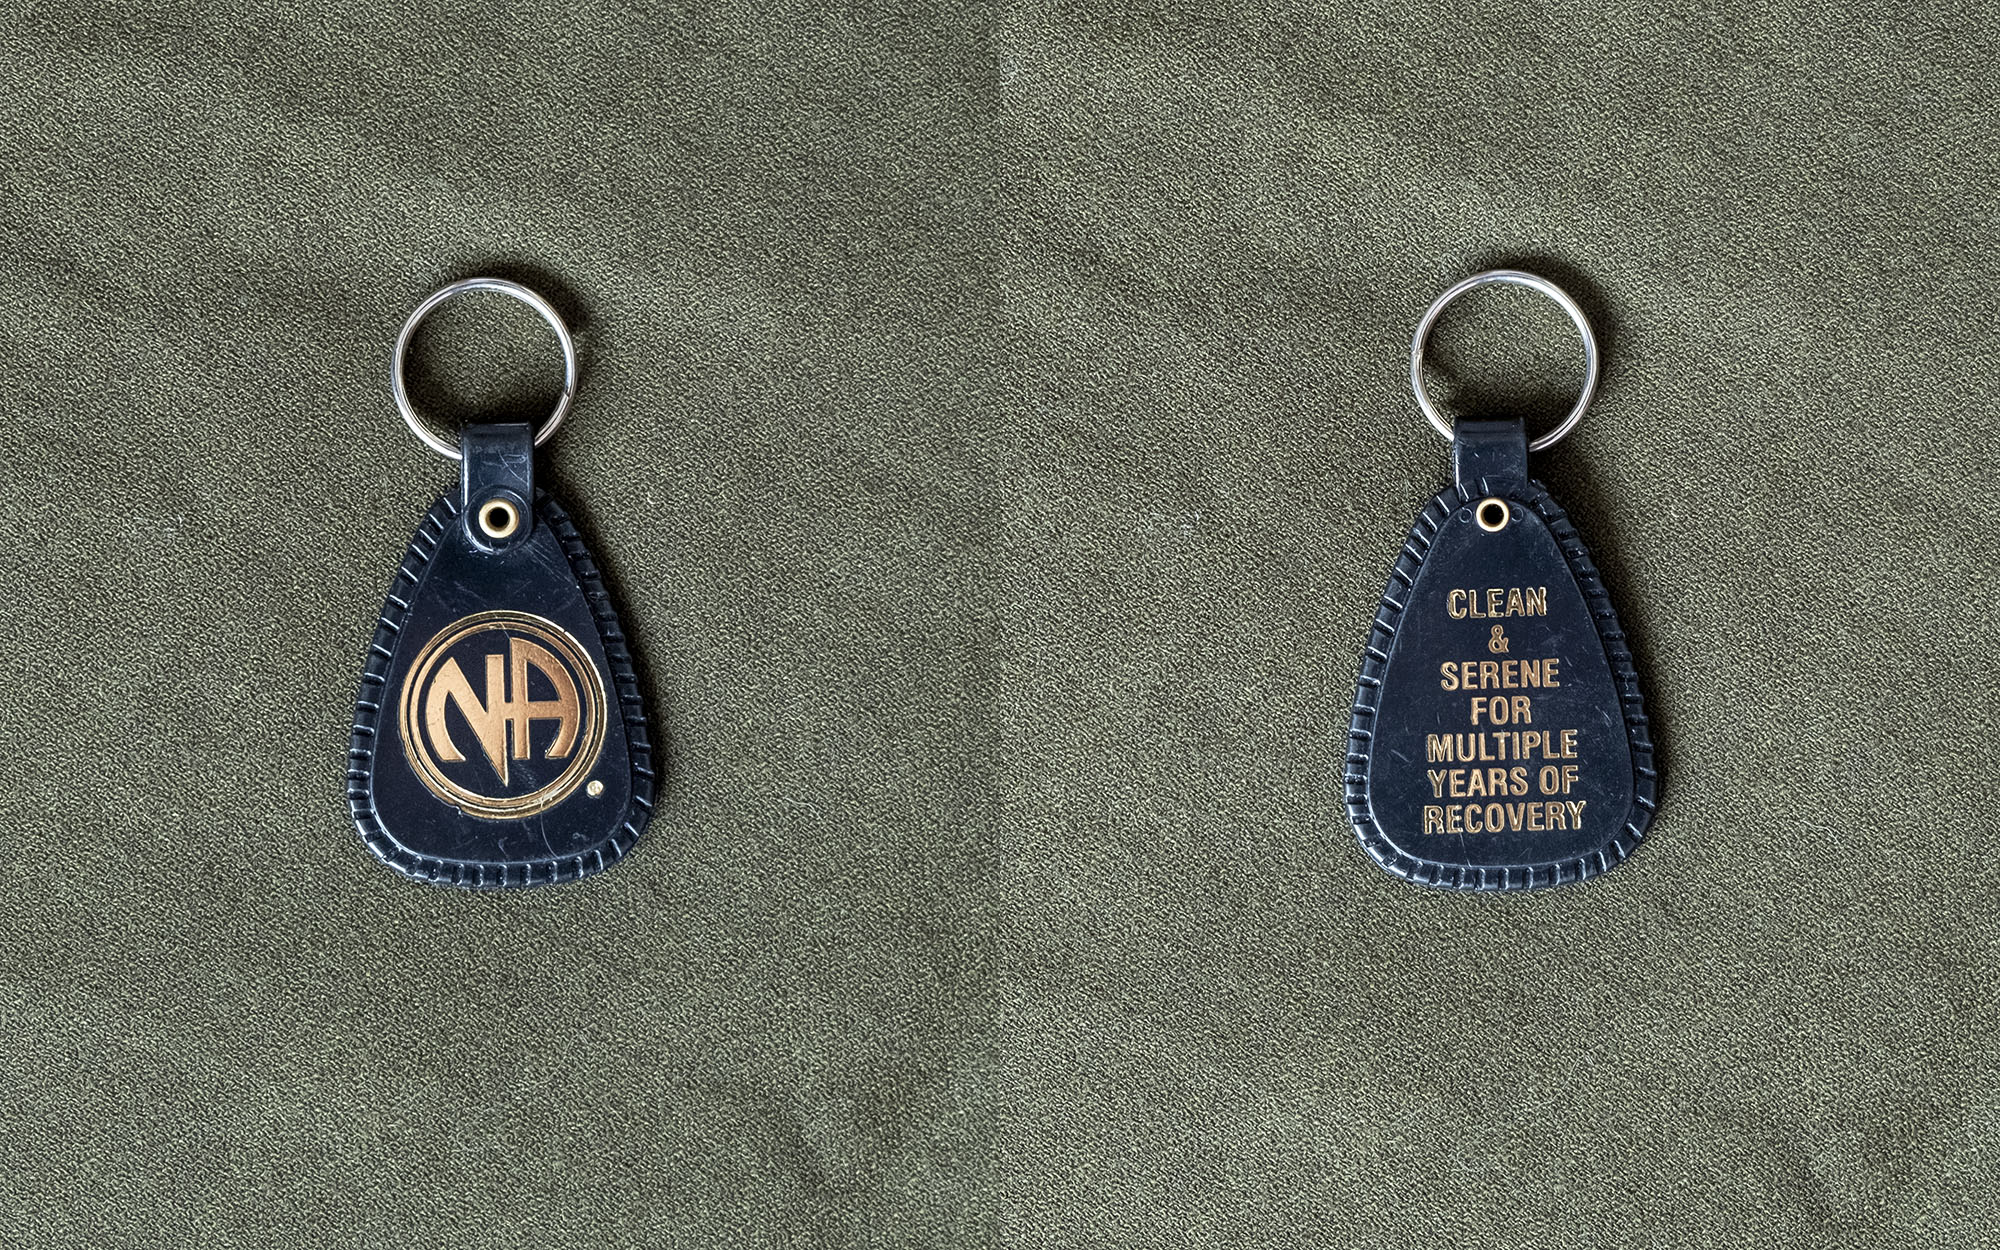 Tag from Narcotics Anonymous that says "Clean and serene for multiple years of recovery"